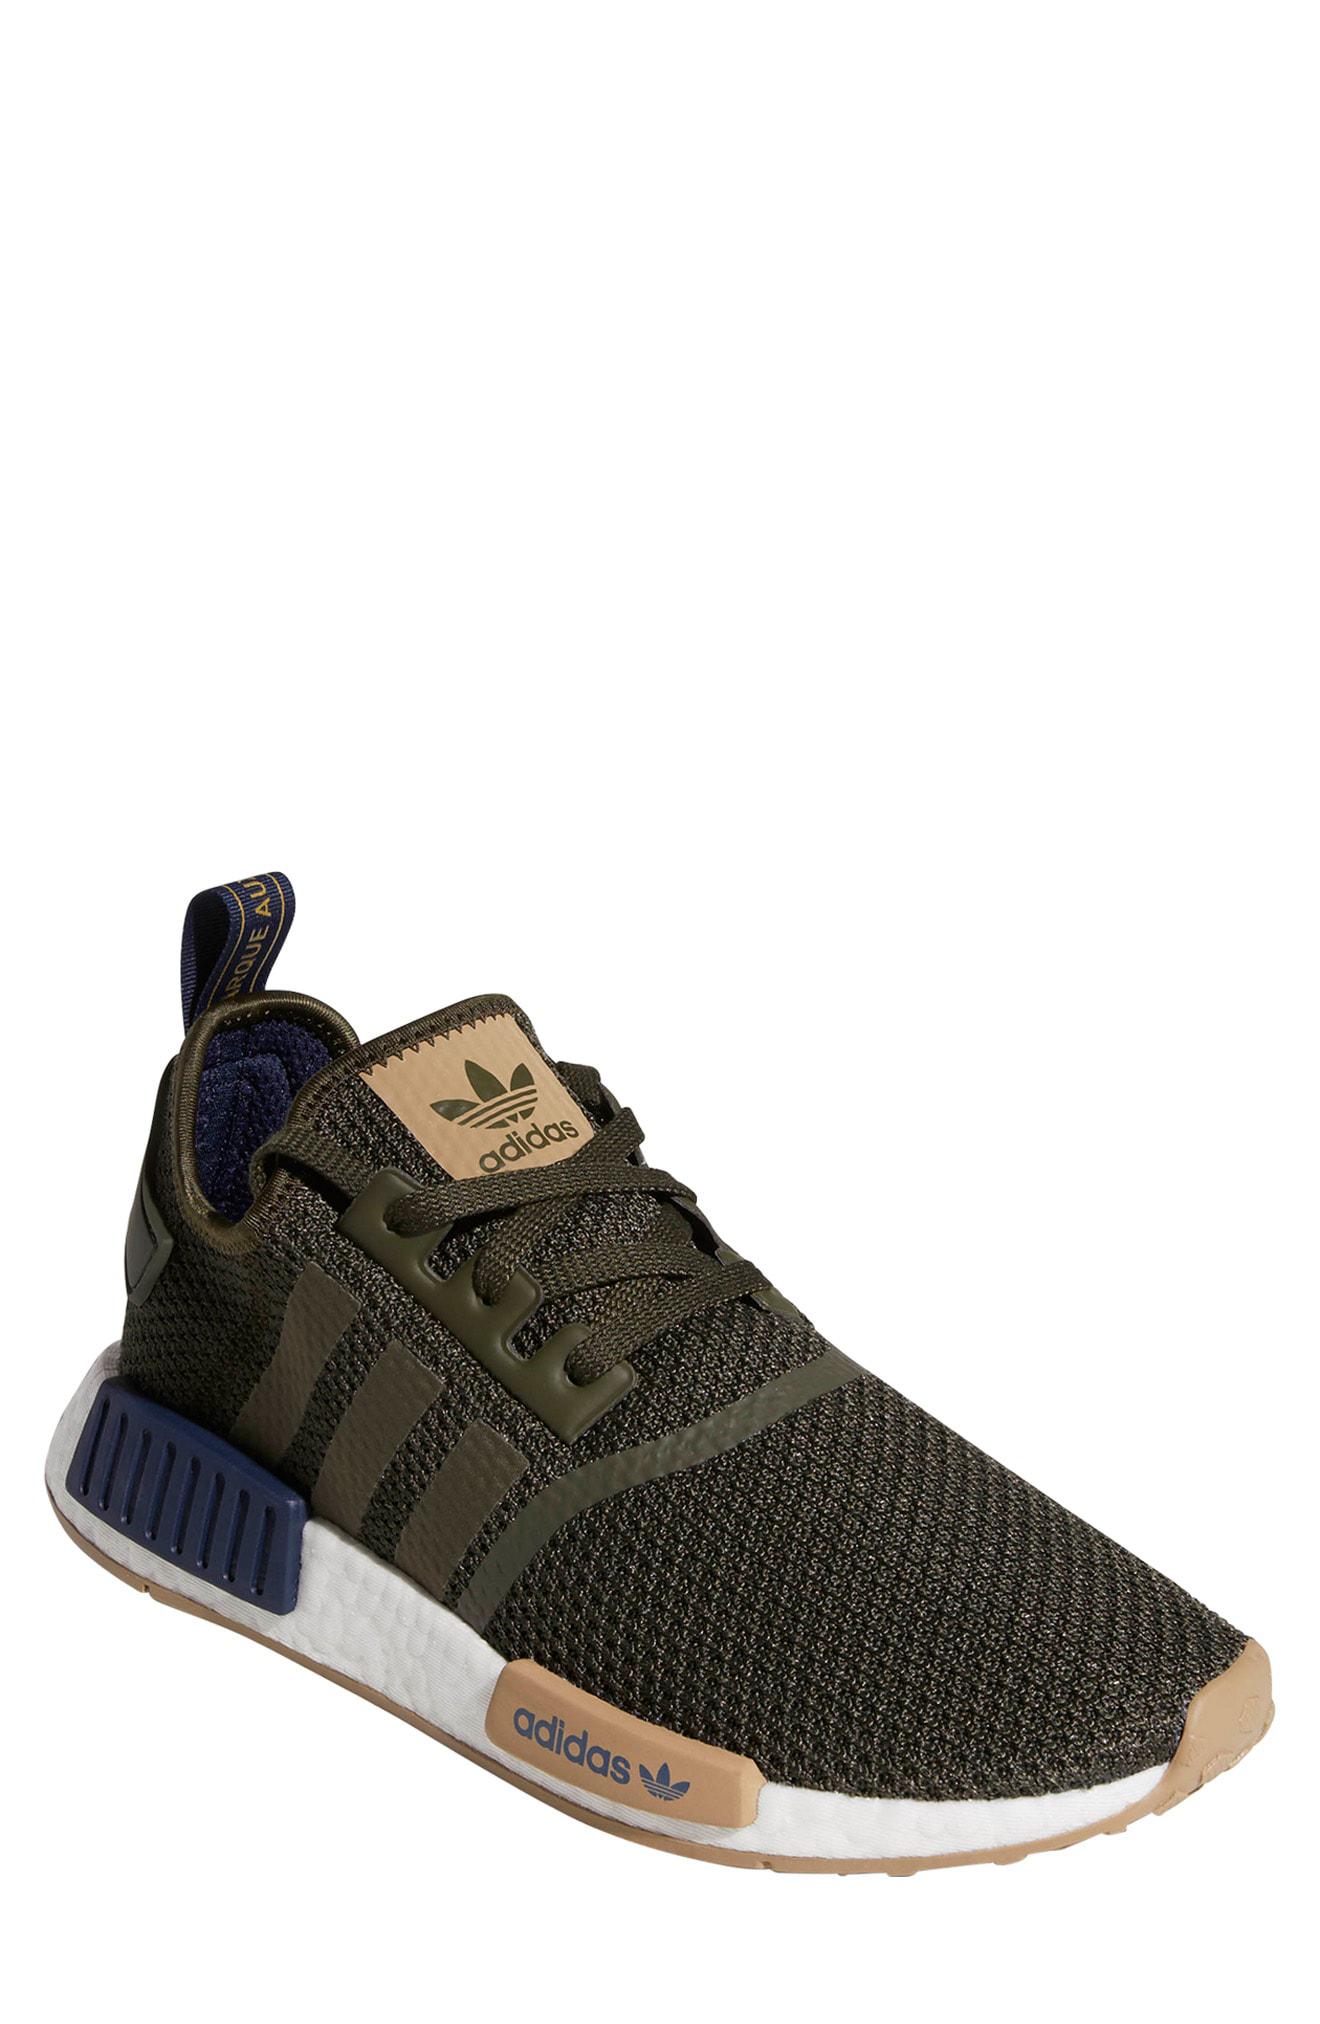 adidas nmd r1 country sneaker